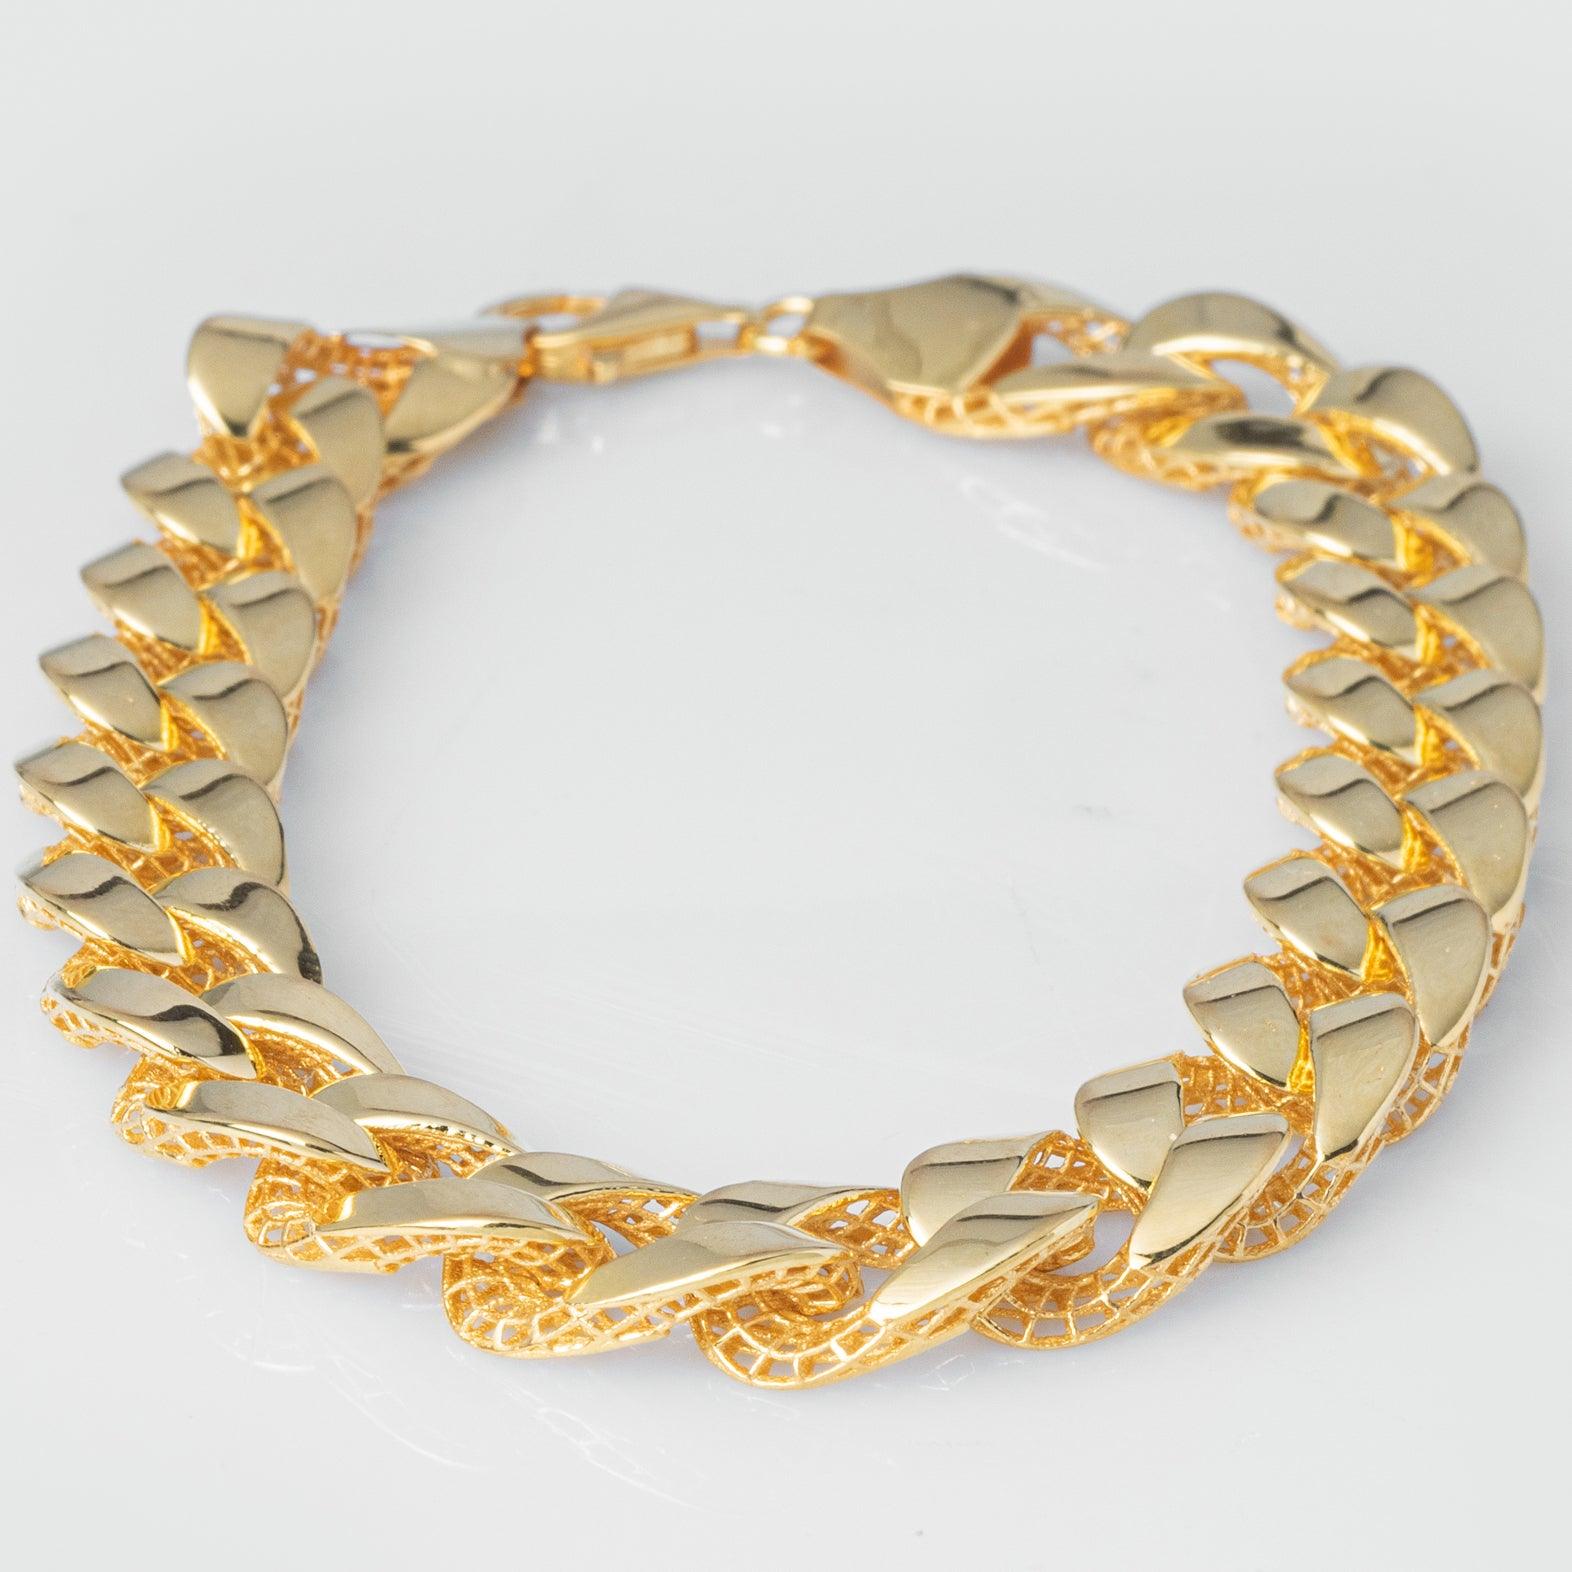 22ct Gold Curb Link Gents Bracelet with Mirror Finish and Mesh Support Backing fitted with a Lobster Clasp GBR-8042 - Minar Jewellers